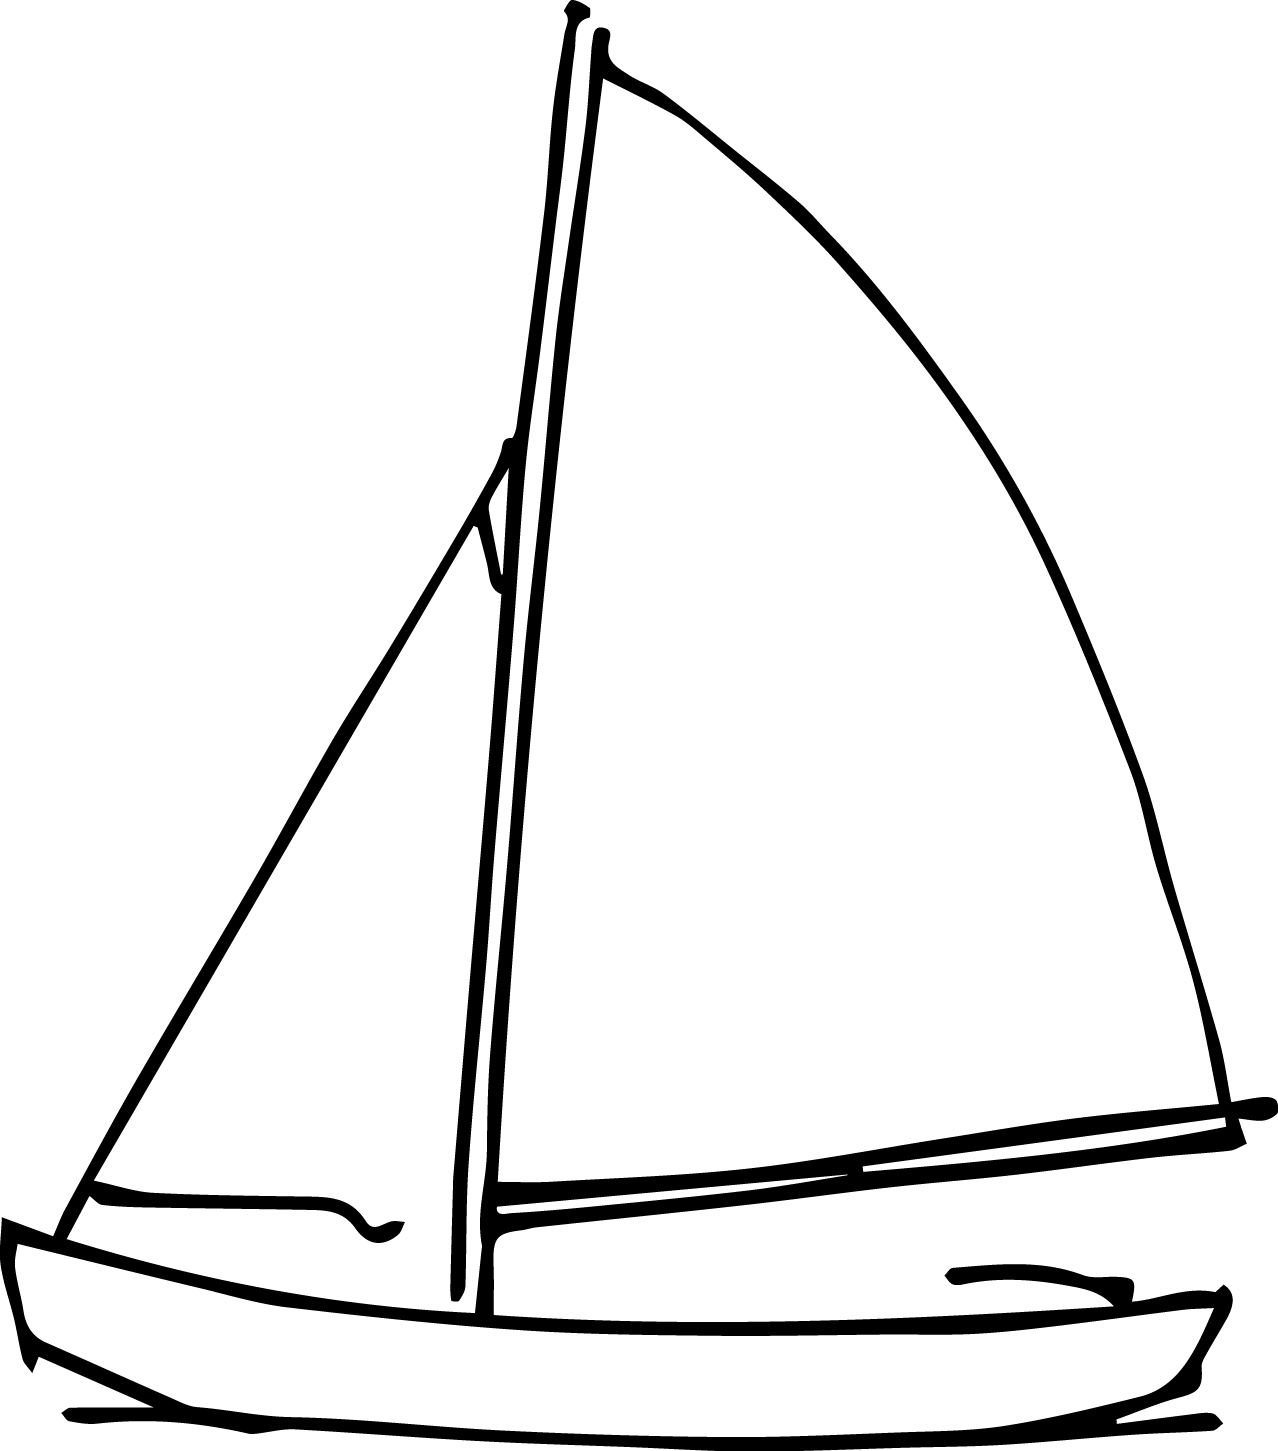 Sketch of Blanchard Junior Knockabout sailboat sketch by Dick Wagner